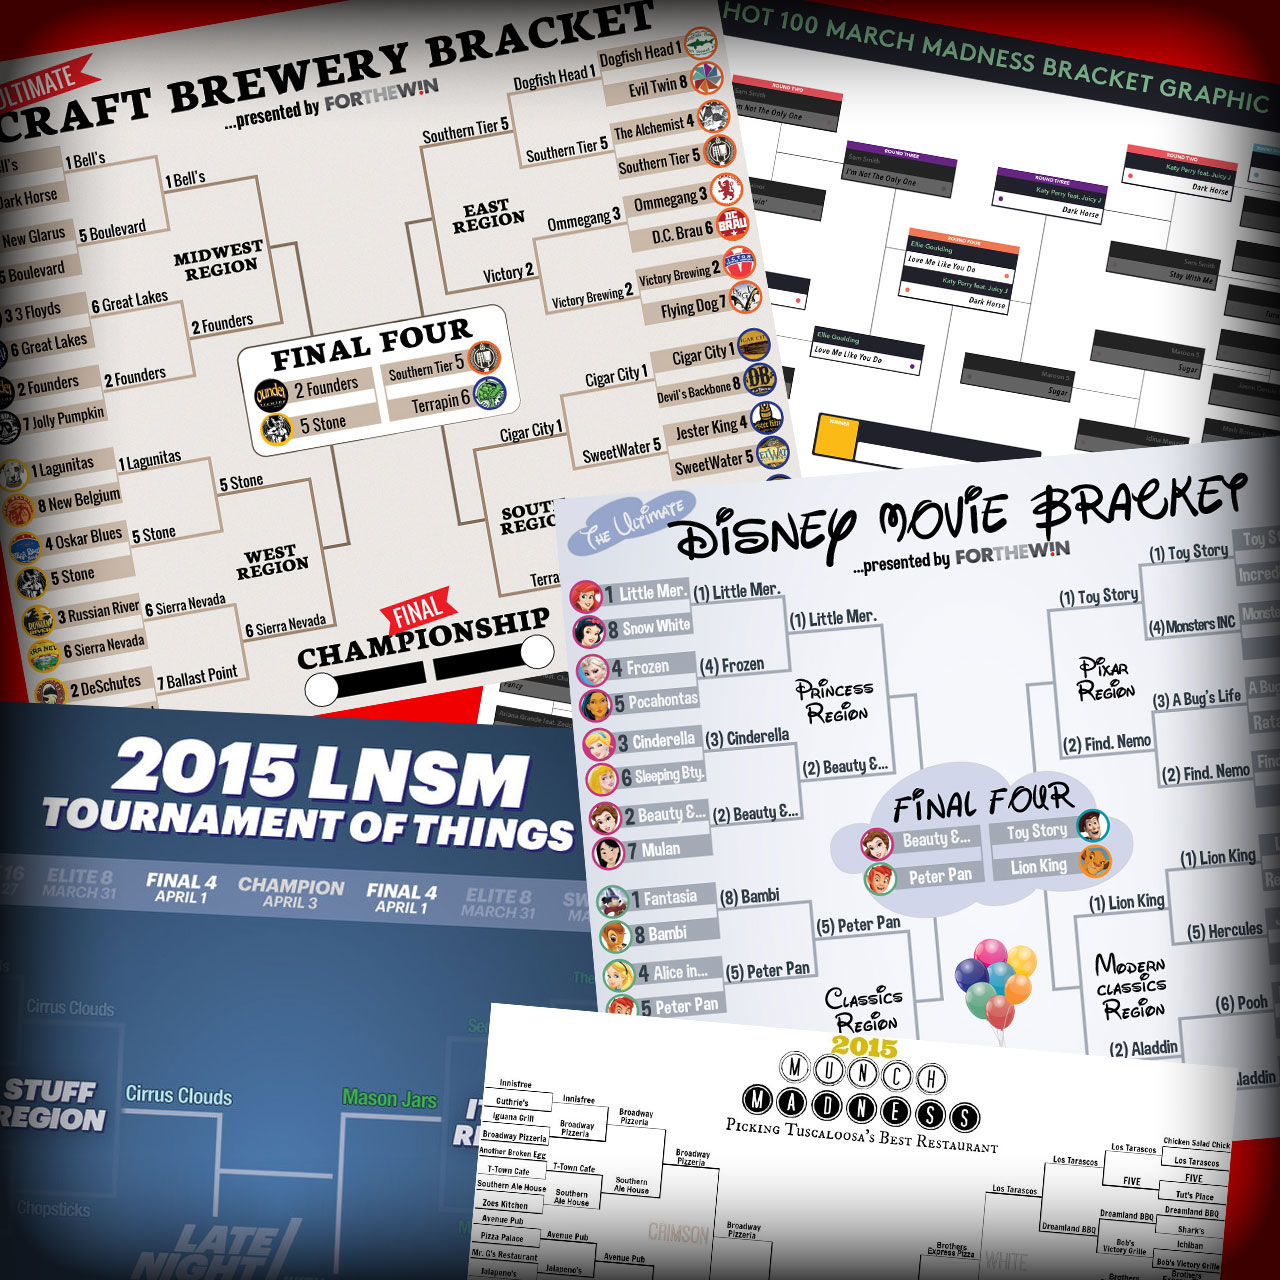 Final Four brackets including craft breweries, Hot 100, Munch Madness and Disney movies